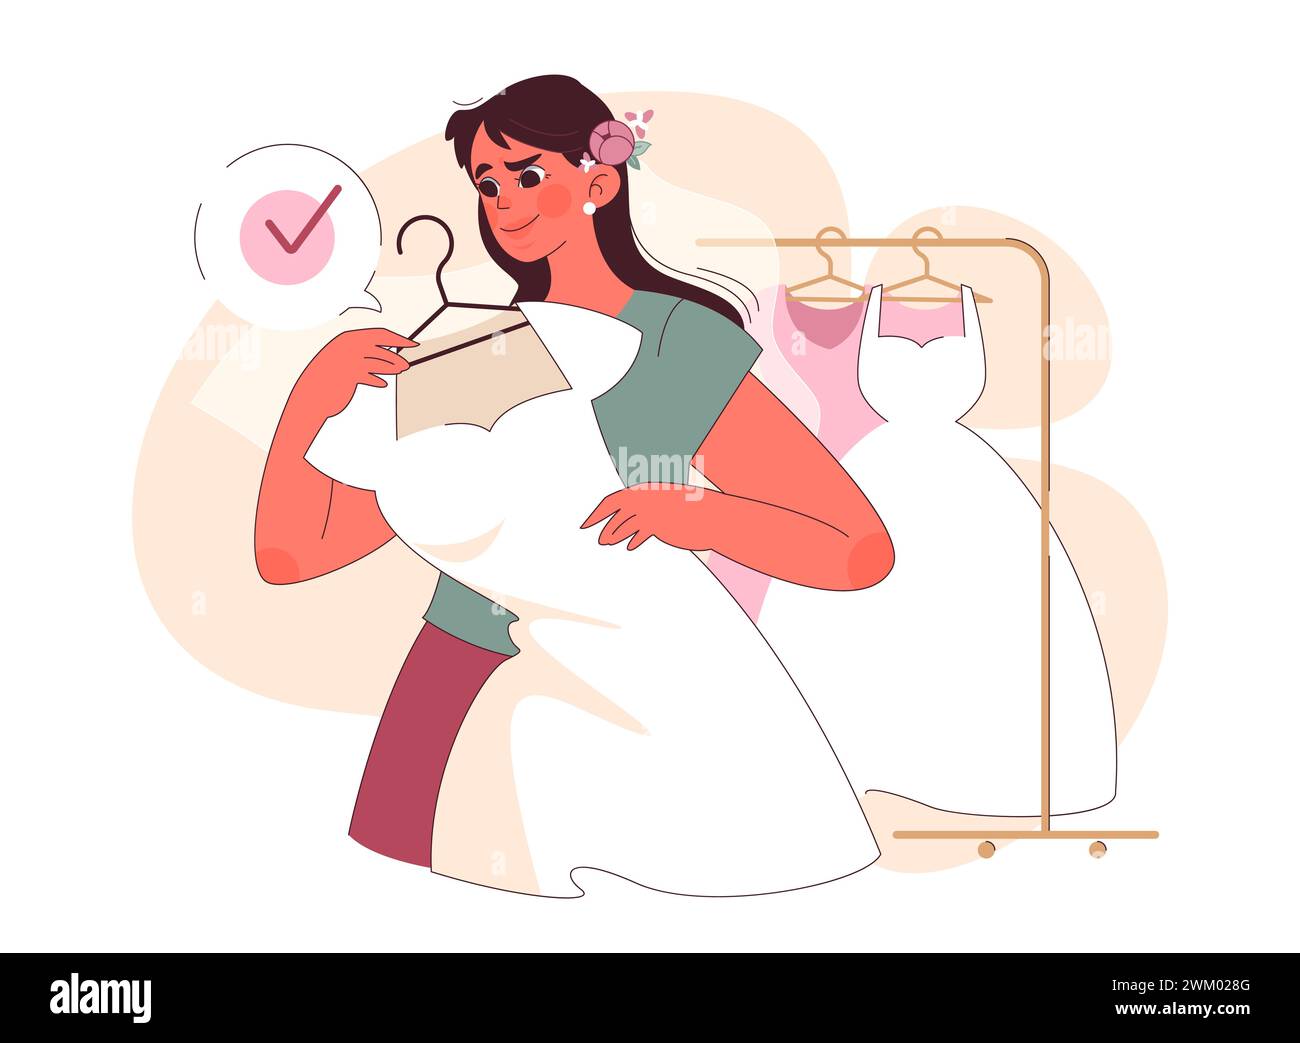 Perfect Choice: A delighted bride-to-be finds her dream wedding dress, symbolizing a moment of joy and preparation. Vector flat illustration. Stock Vector